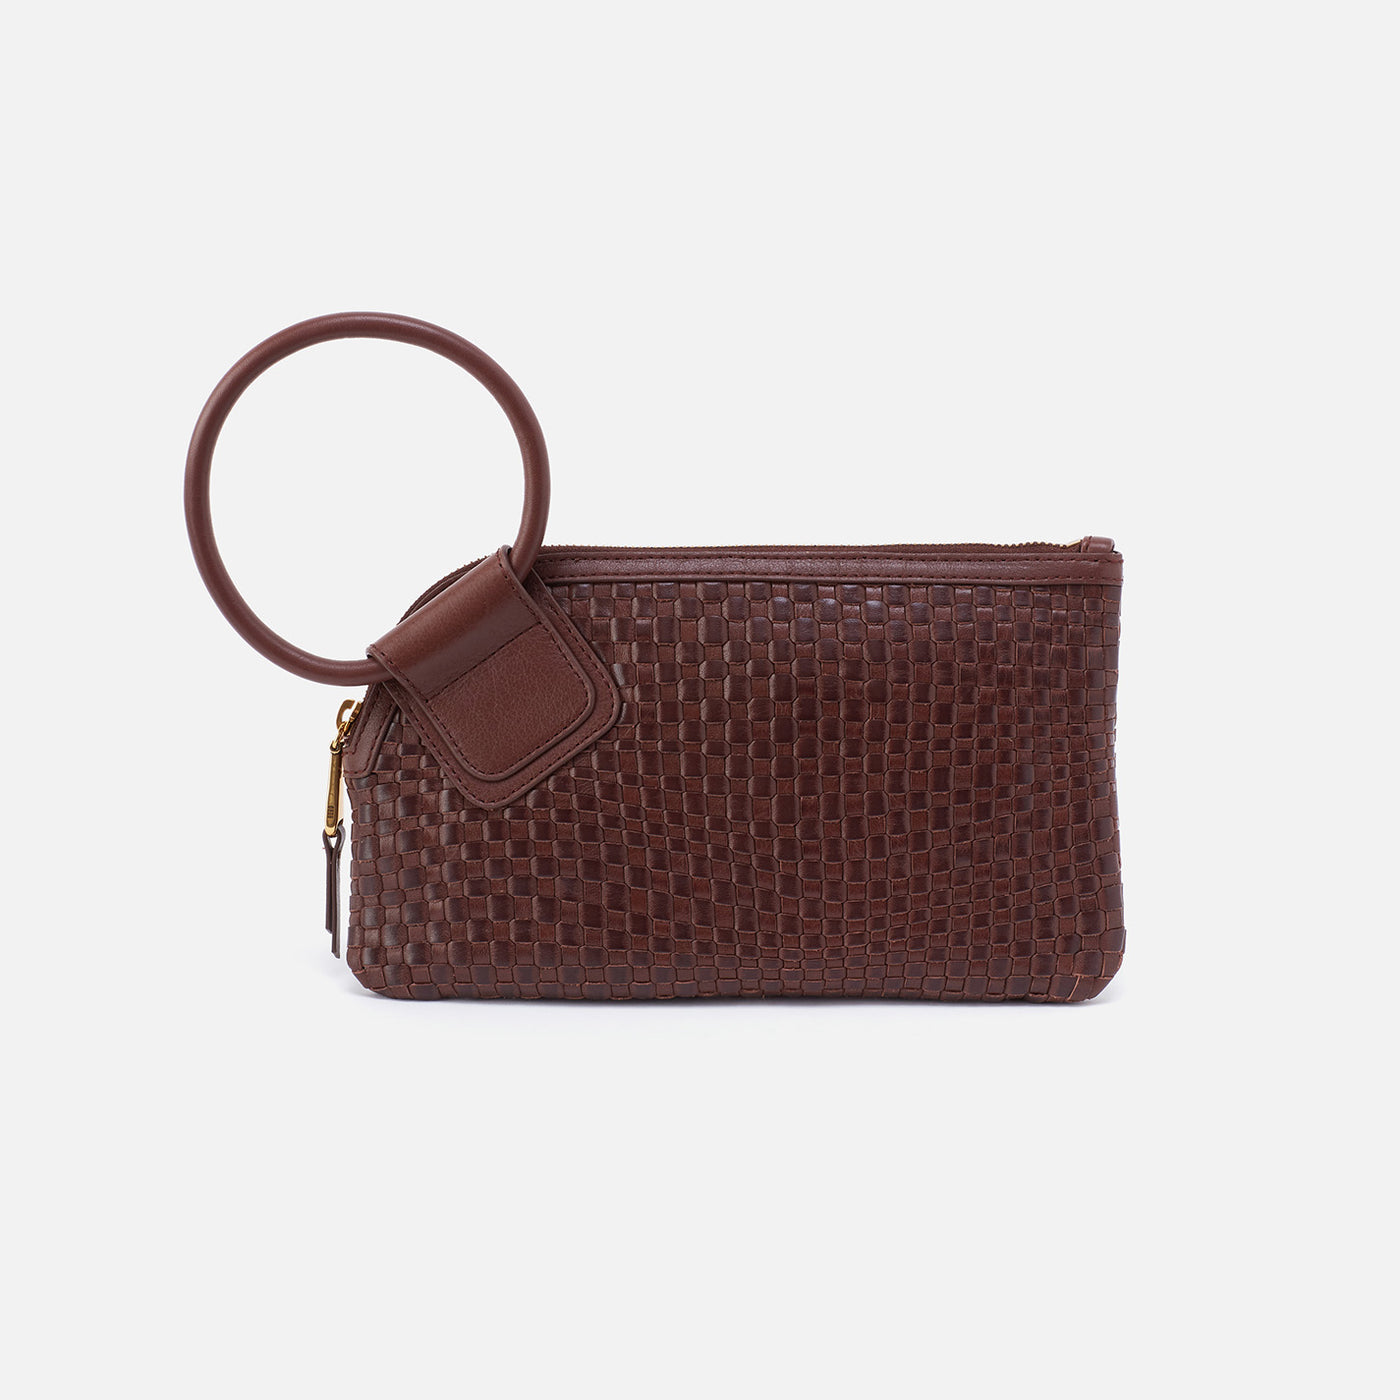 Sable Wristlet in Wave Weave Leather - Pecan